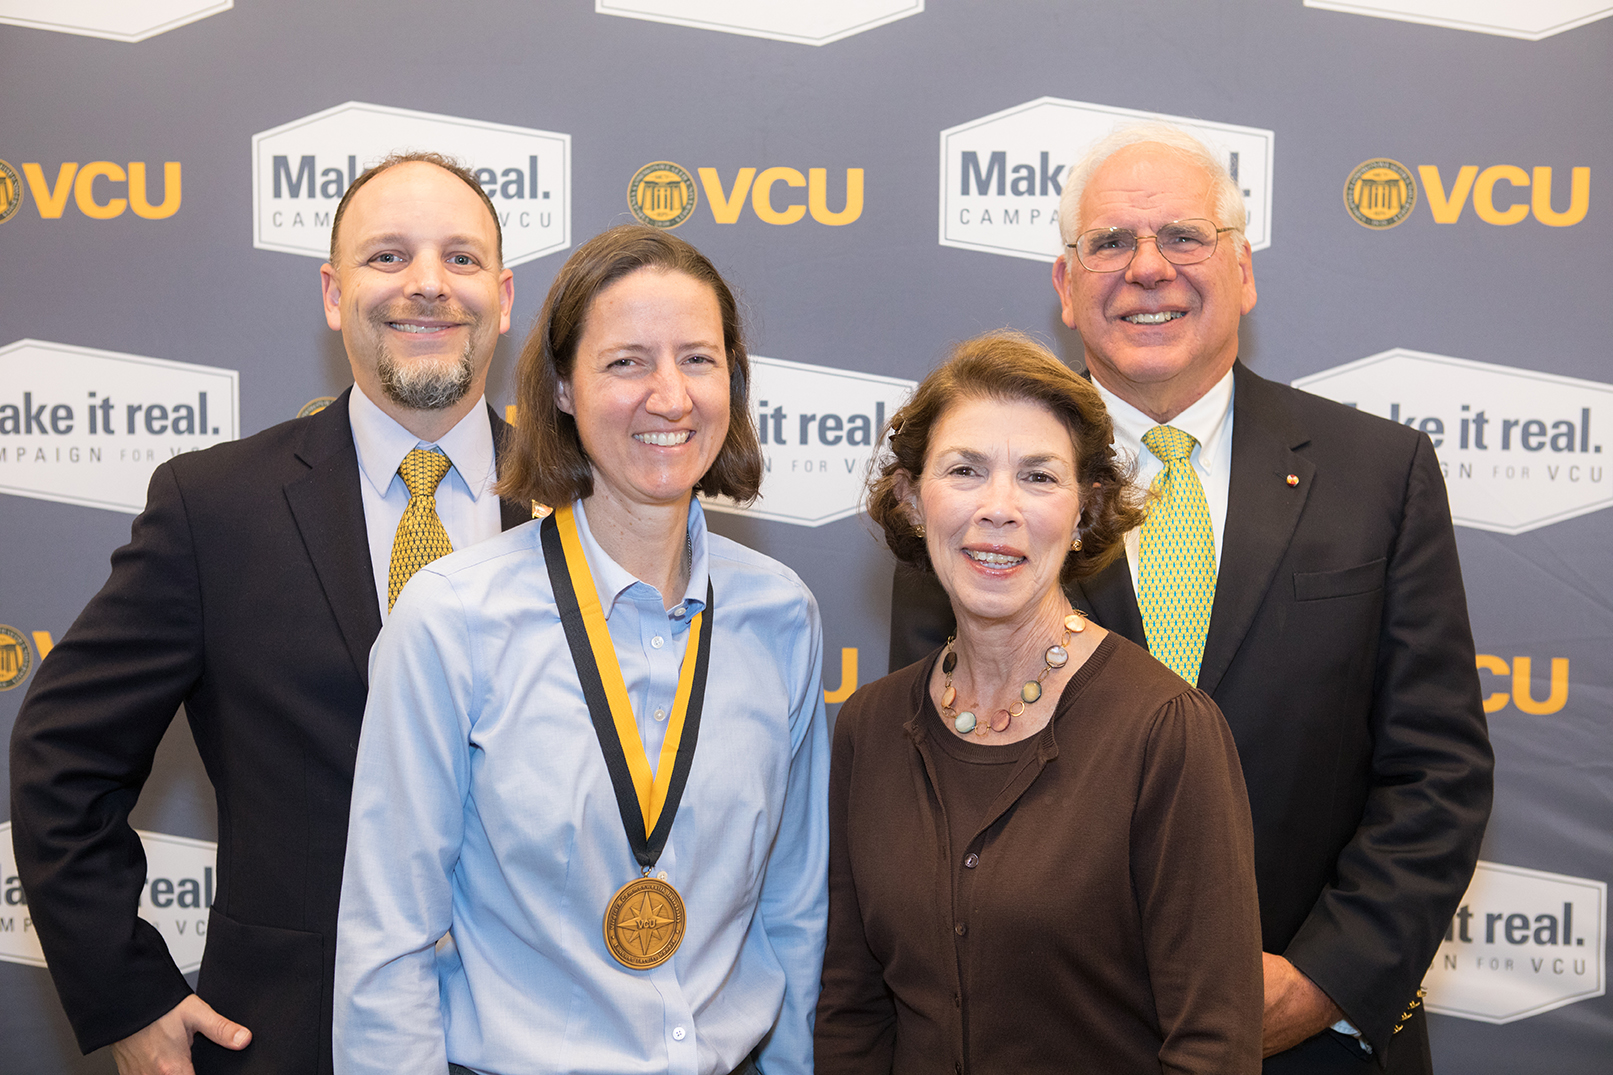 Beverley B. Clary Chair Victoria Kuester, M.D., H’06 (second from left), with husband Karl Kuester (far left), Kathryn H. Clary and Richard M. Clary, M’74, who established the chair with his family to honor the memory of his late father, a 1939 alumnus of the Medical College of Virginia.